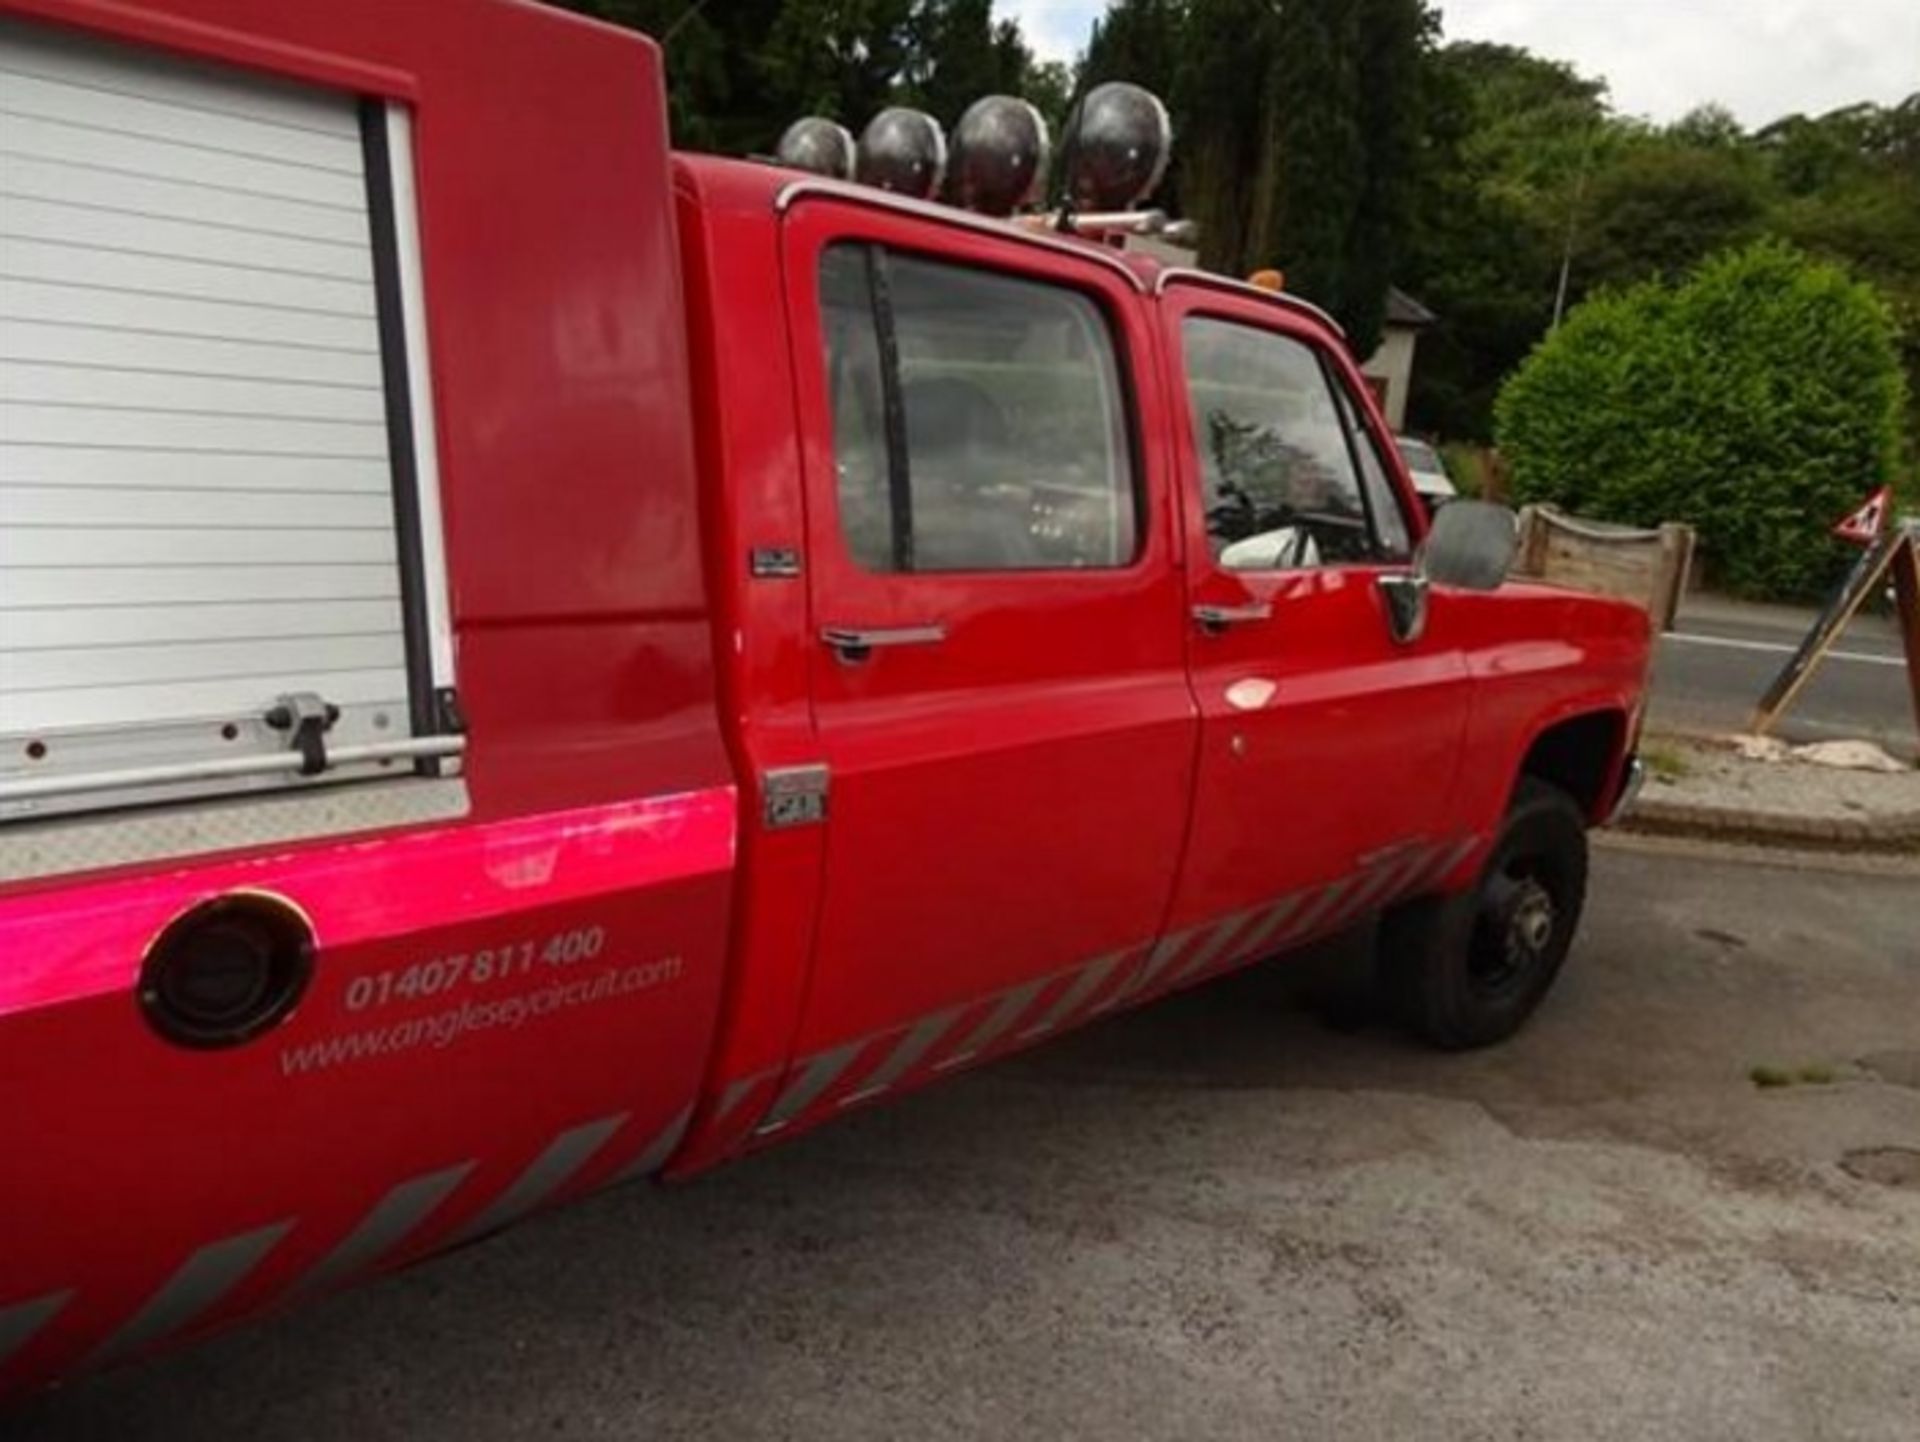 1989 Gmc Chevrolet Fire Truck, 6X6 Diesel 6.2 R.H.D. Auto-Od (Red) - Image 4 of 24